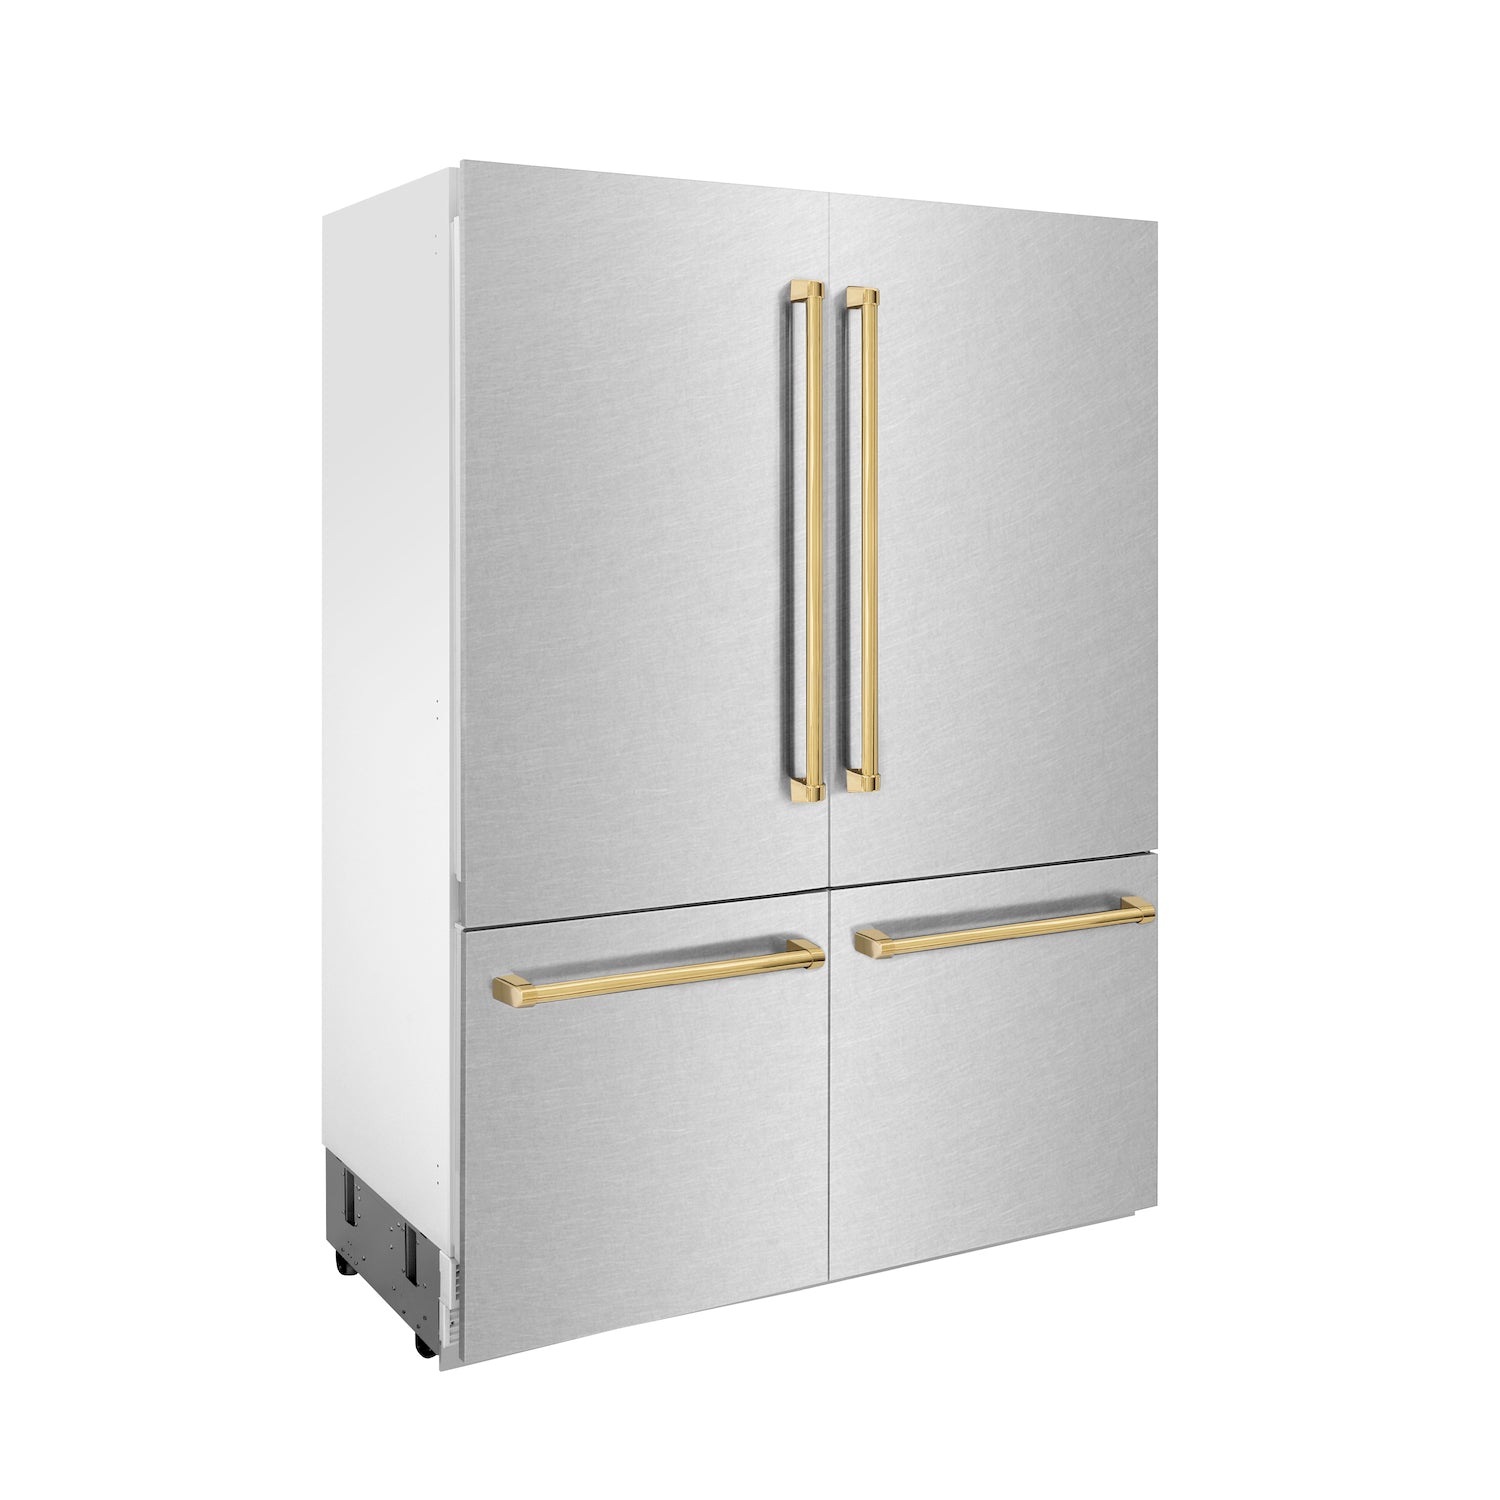 ZLINE Autograph Edition 60 in. 32.2 cu. ft. Built-in 4-Door French Door Refrigerator with Internal Water and Ice Dispenser in Fingerprint Resistant Stainless Steel with Polished Gold Accents (RBIVZ-SN-60-G) side.